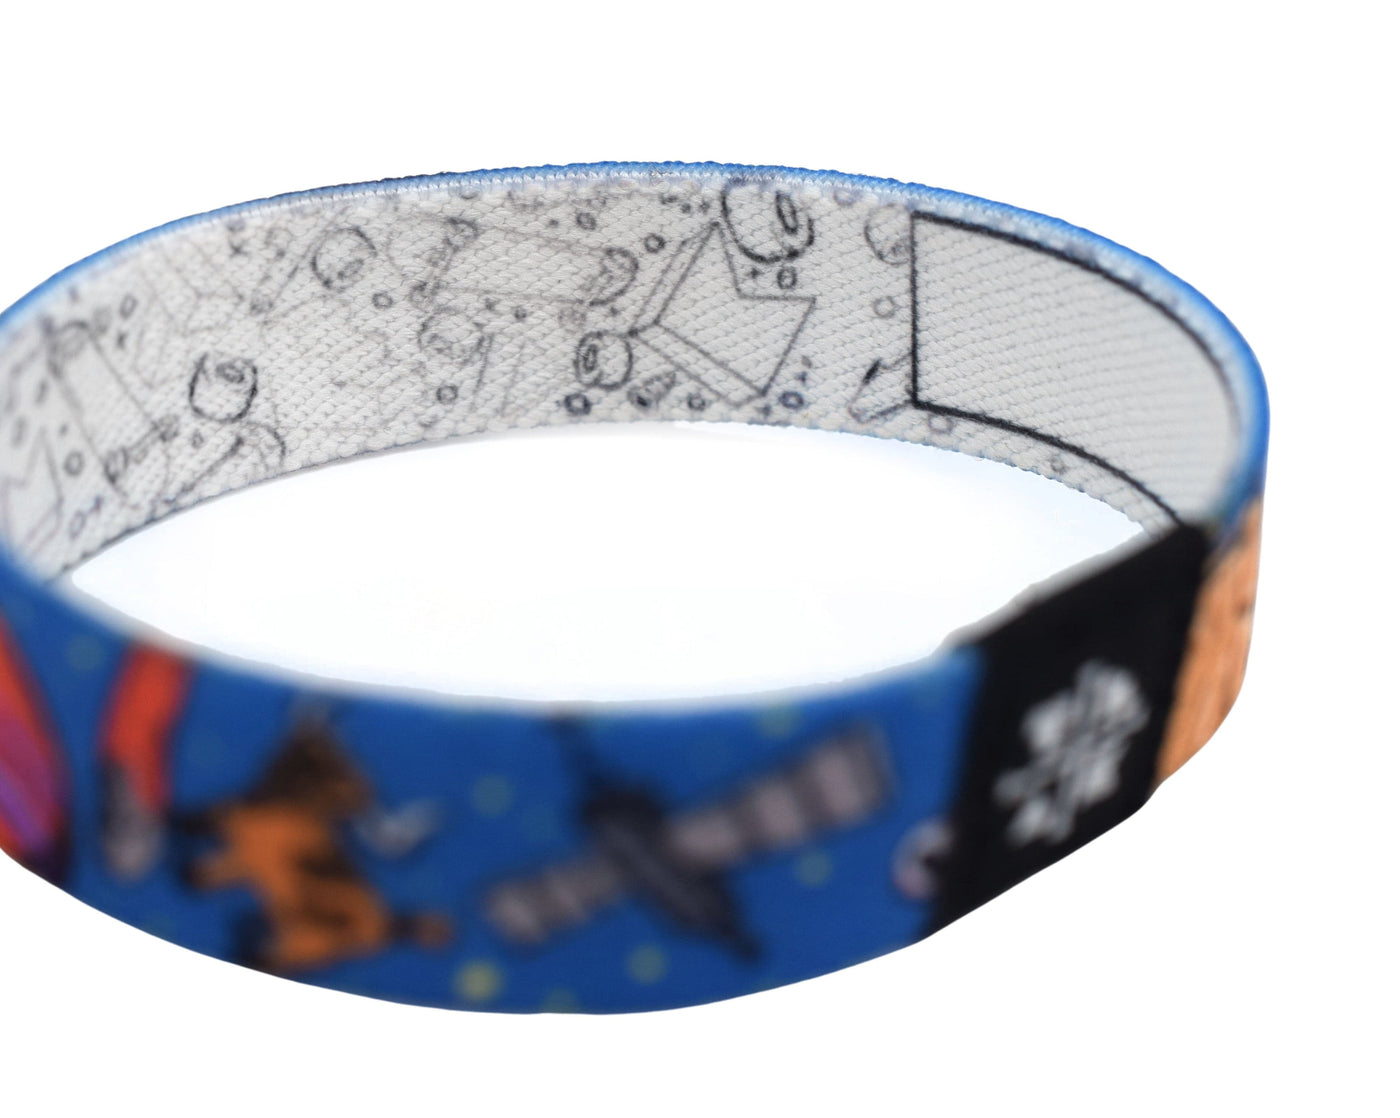 Teak Tuning Teak Tuning "Rock It" Wristband - Space Ape Edition - Stretchy Polyester, One Size Fits Most - 175mm x 15mm